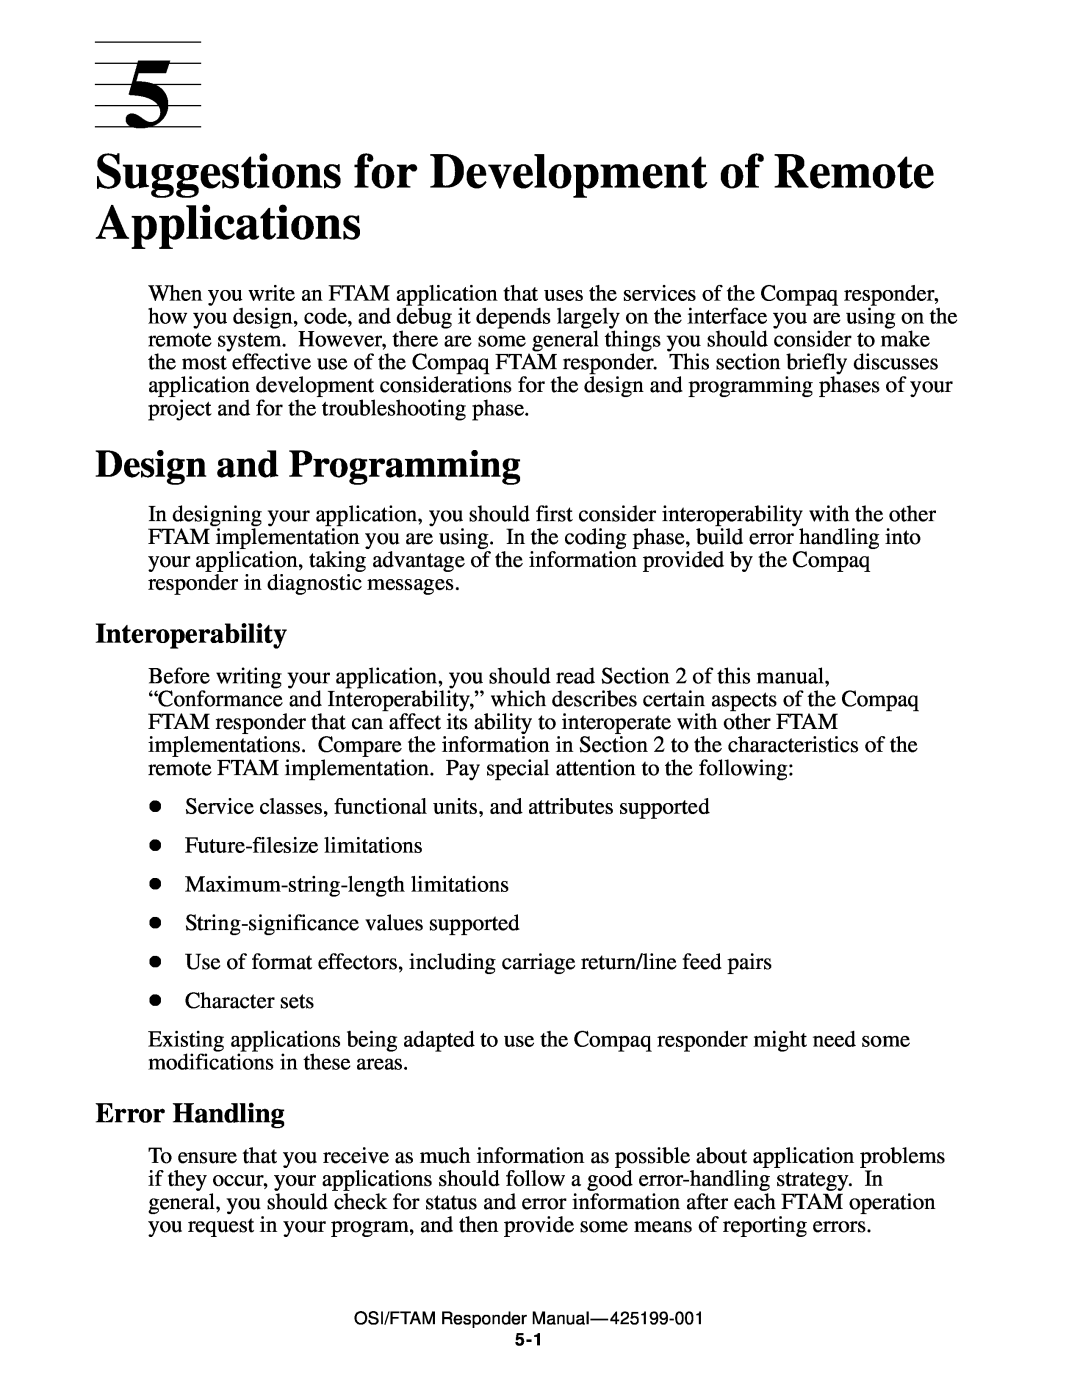 Compaq OSI/FTAM D43 manual Suggestions for Development of Remote Applications, Design and Programming, Interoperability 